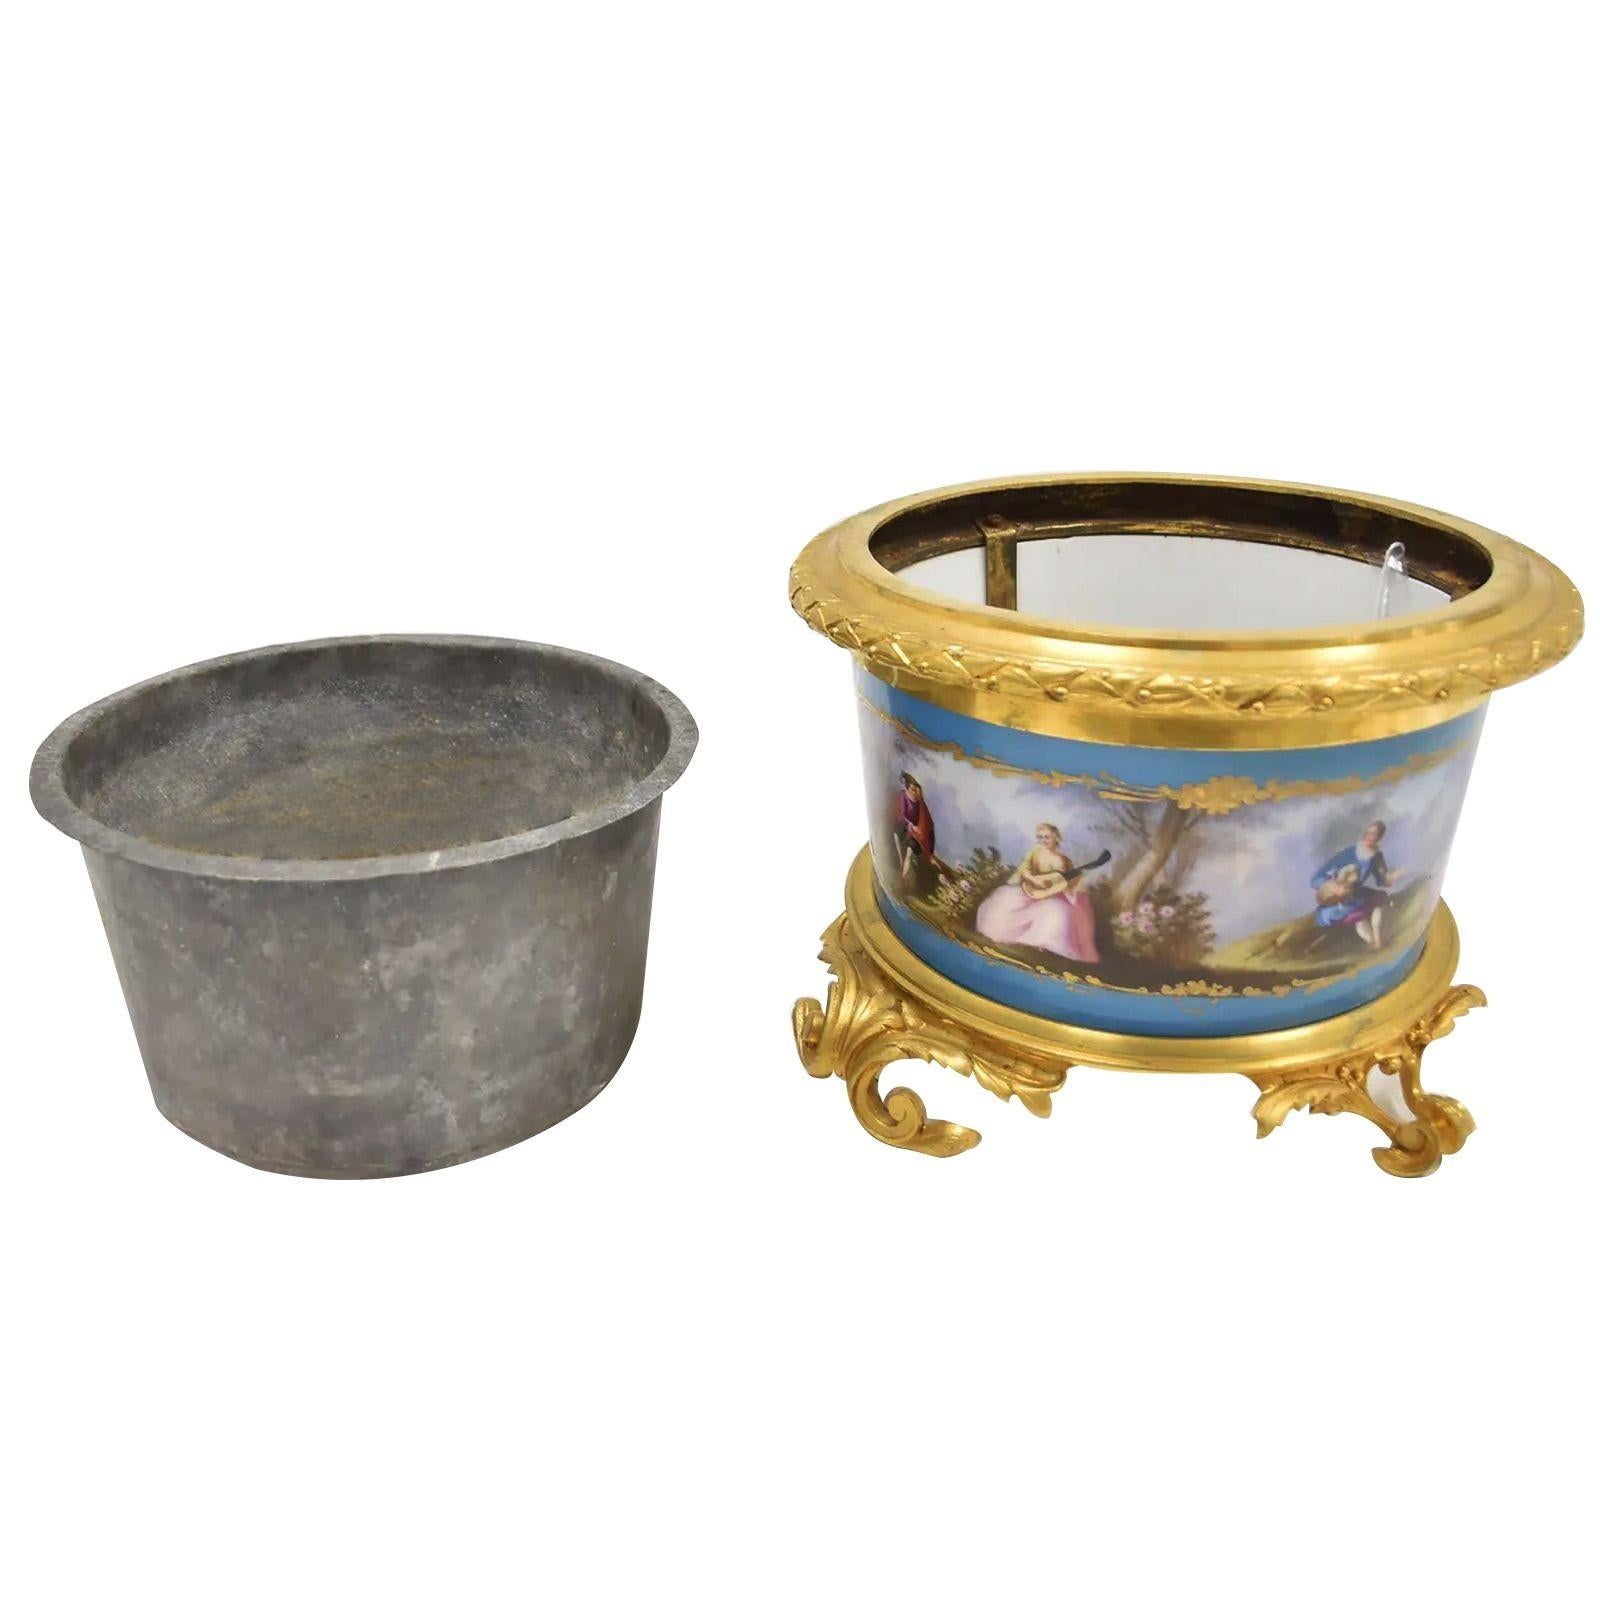 French 19th Century Hand painted sevres & bronze mounted planter with romantic scenes all around with french bronze mounts
 
Dimensions
 
10 1/2